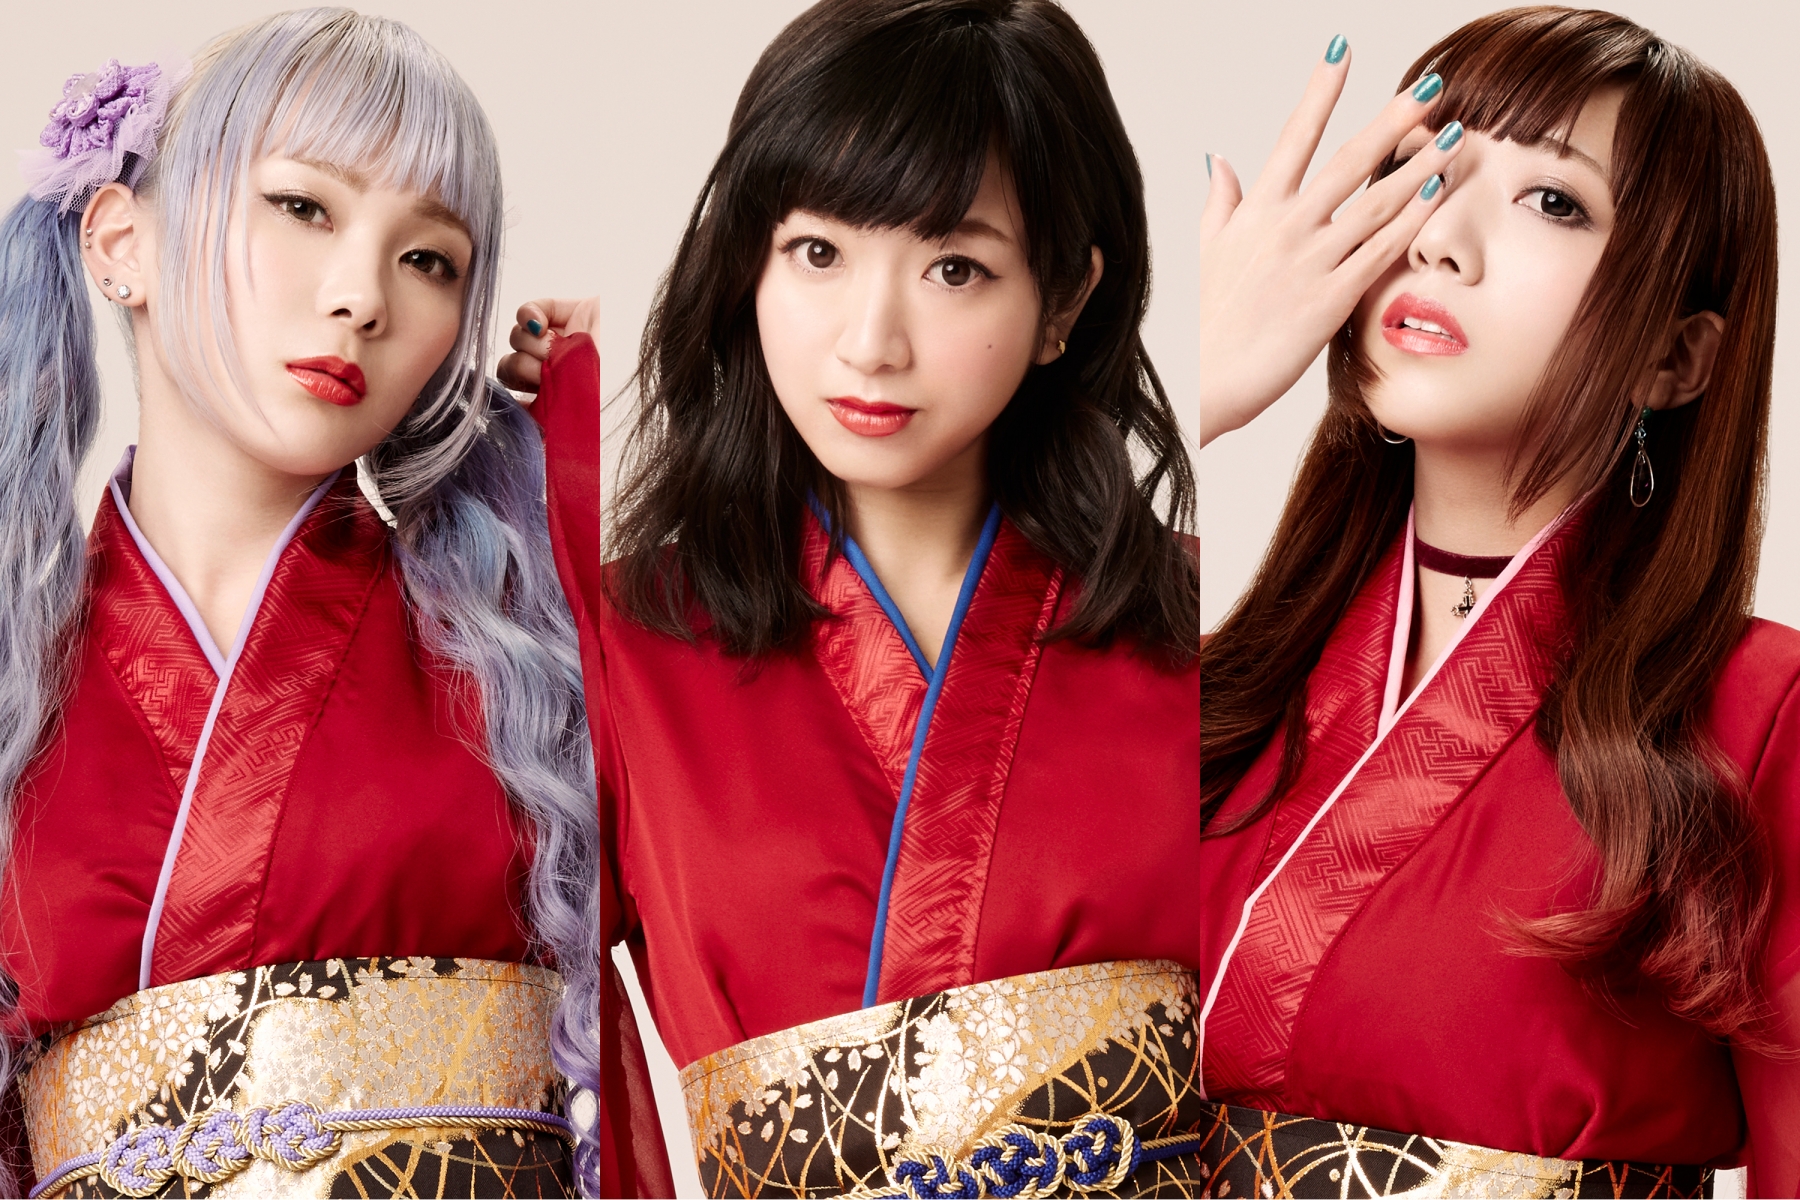 Ninja Idols Ultimate Future Weapons mofu Jump Through Time in the MV for Their Debut Single!